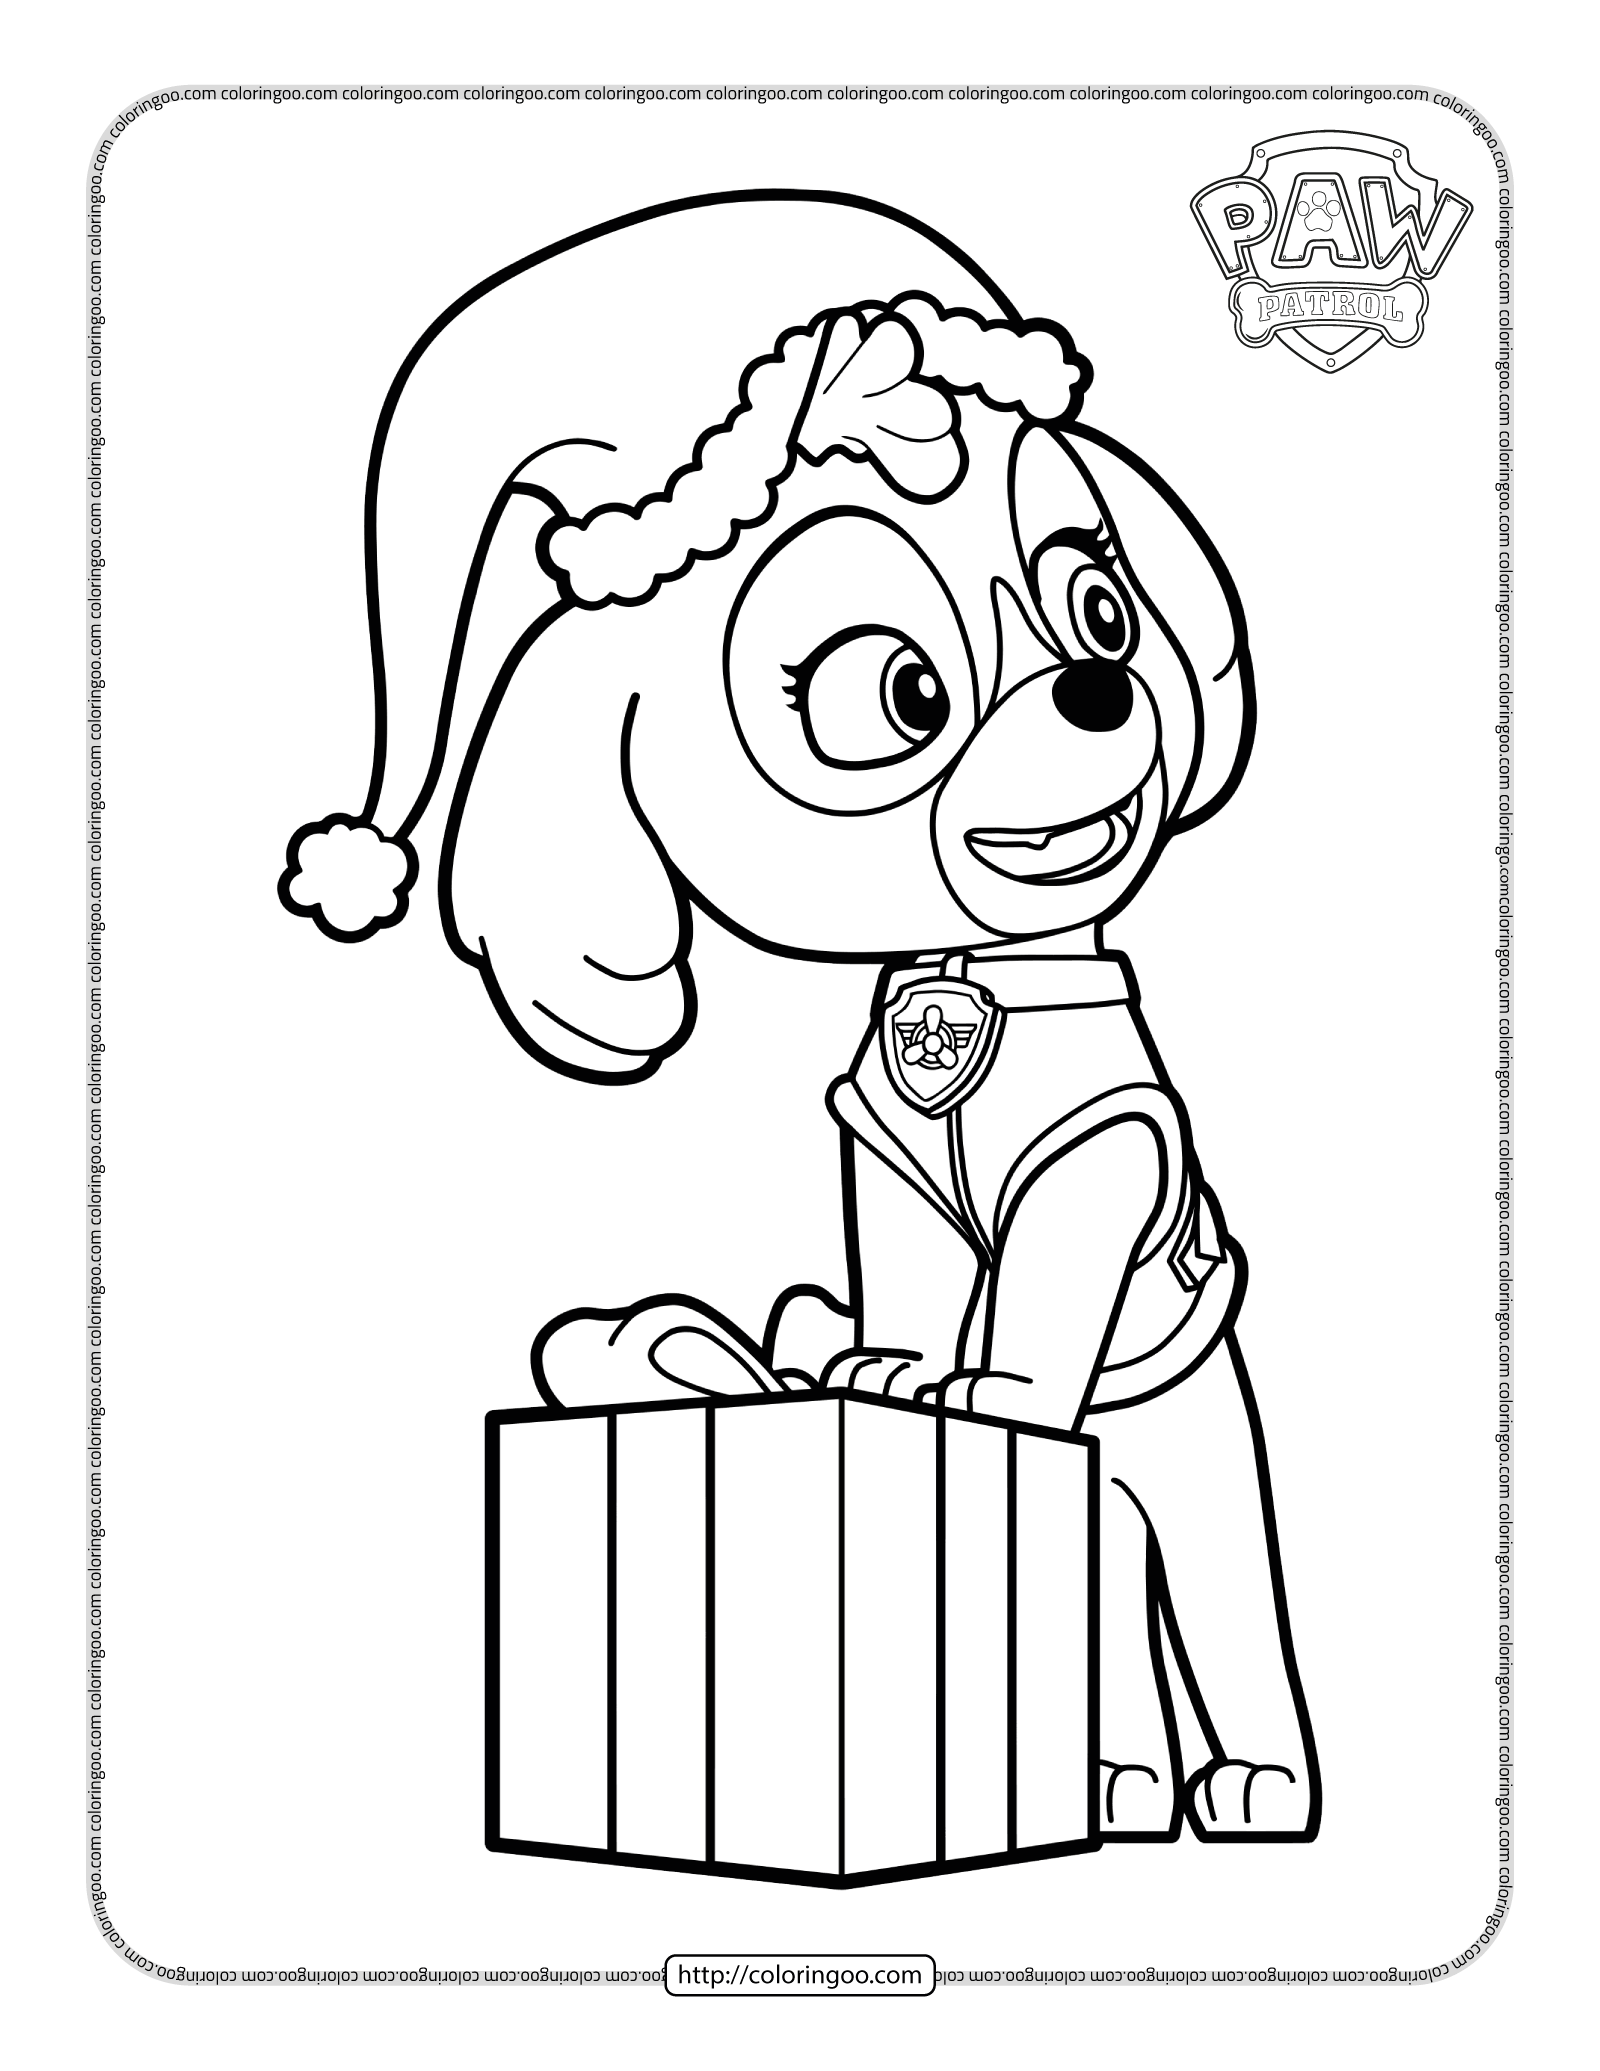 paw patrol skye with a gift coloring page